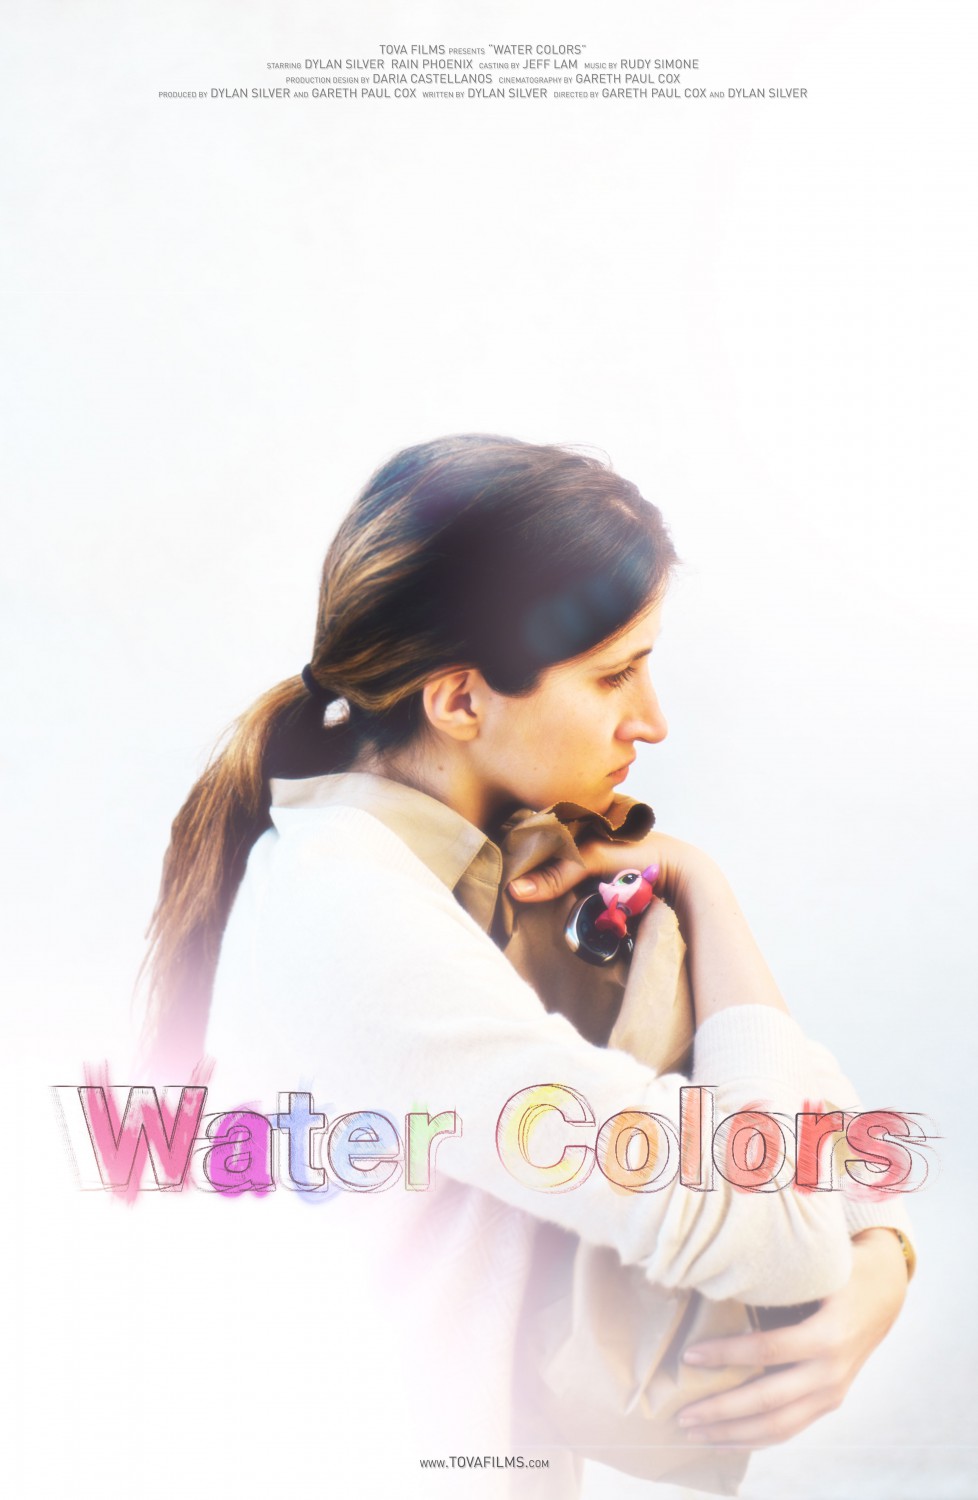 Extra Large Movie Poster Image for Water Colors